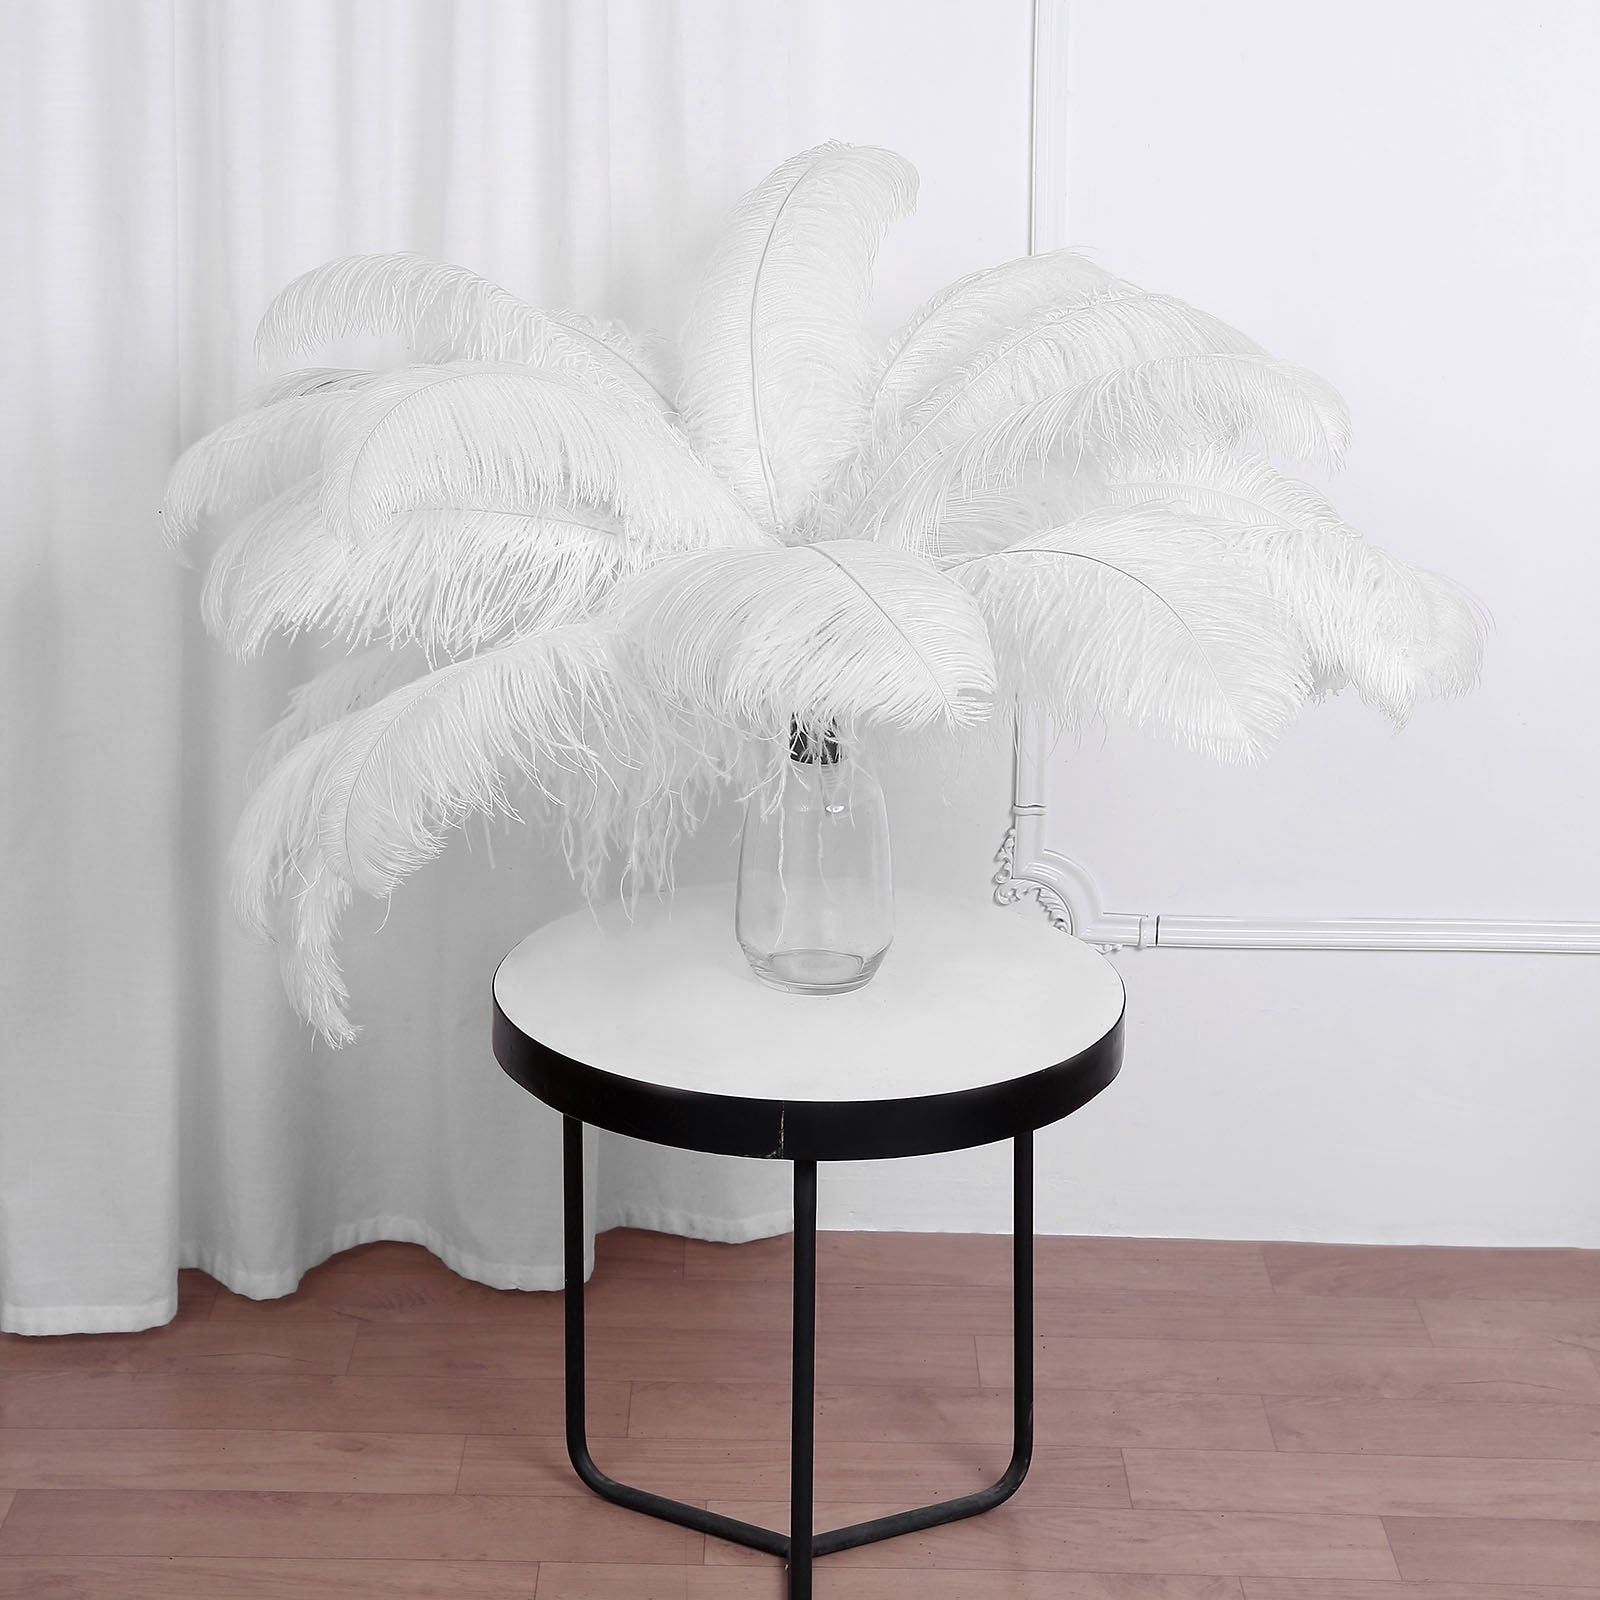 White Natural Plume Ostrich Feathers Centerpiece - 24-26